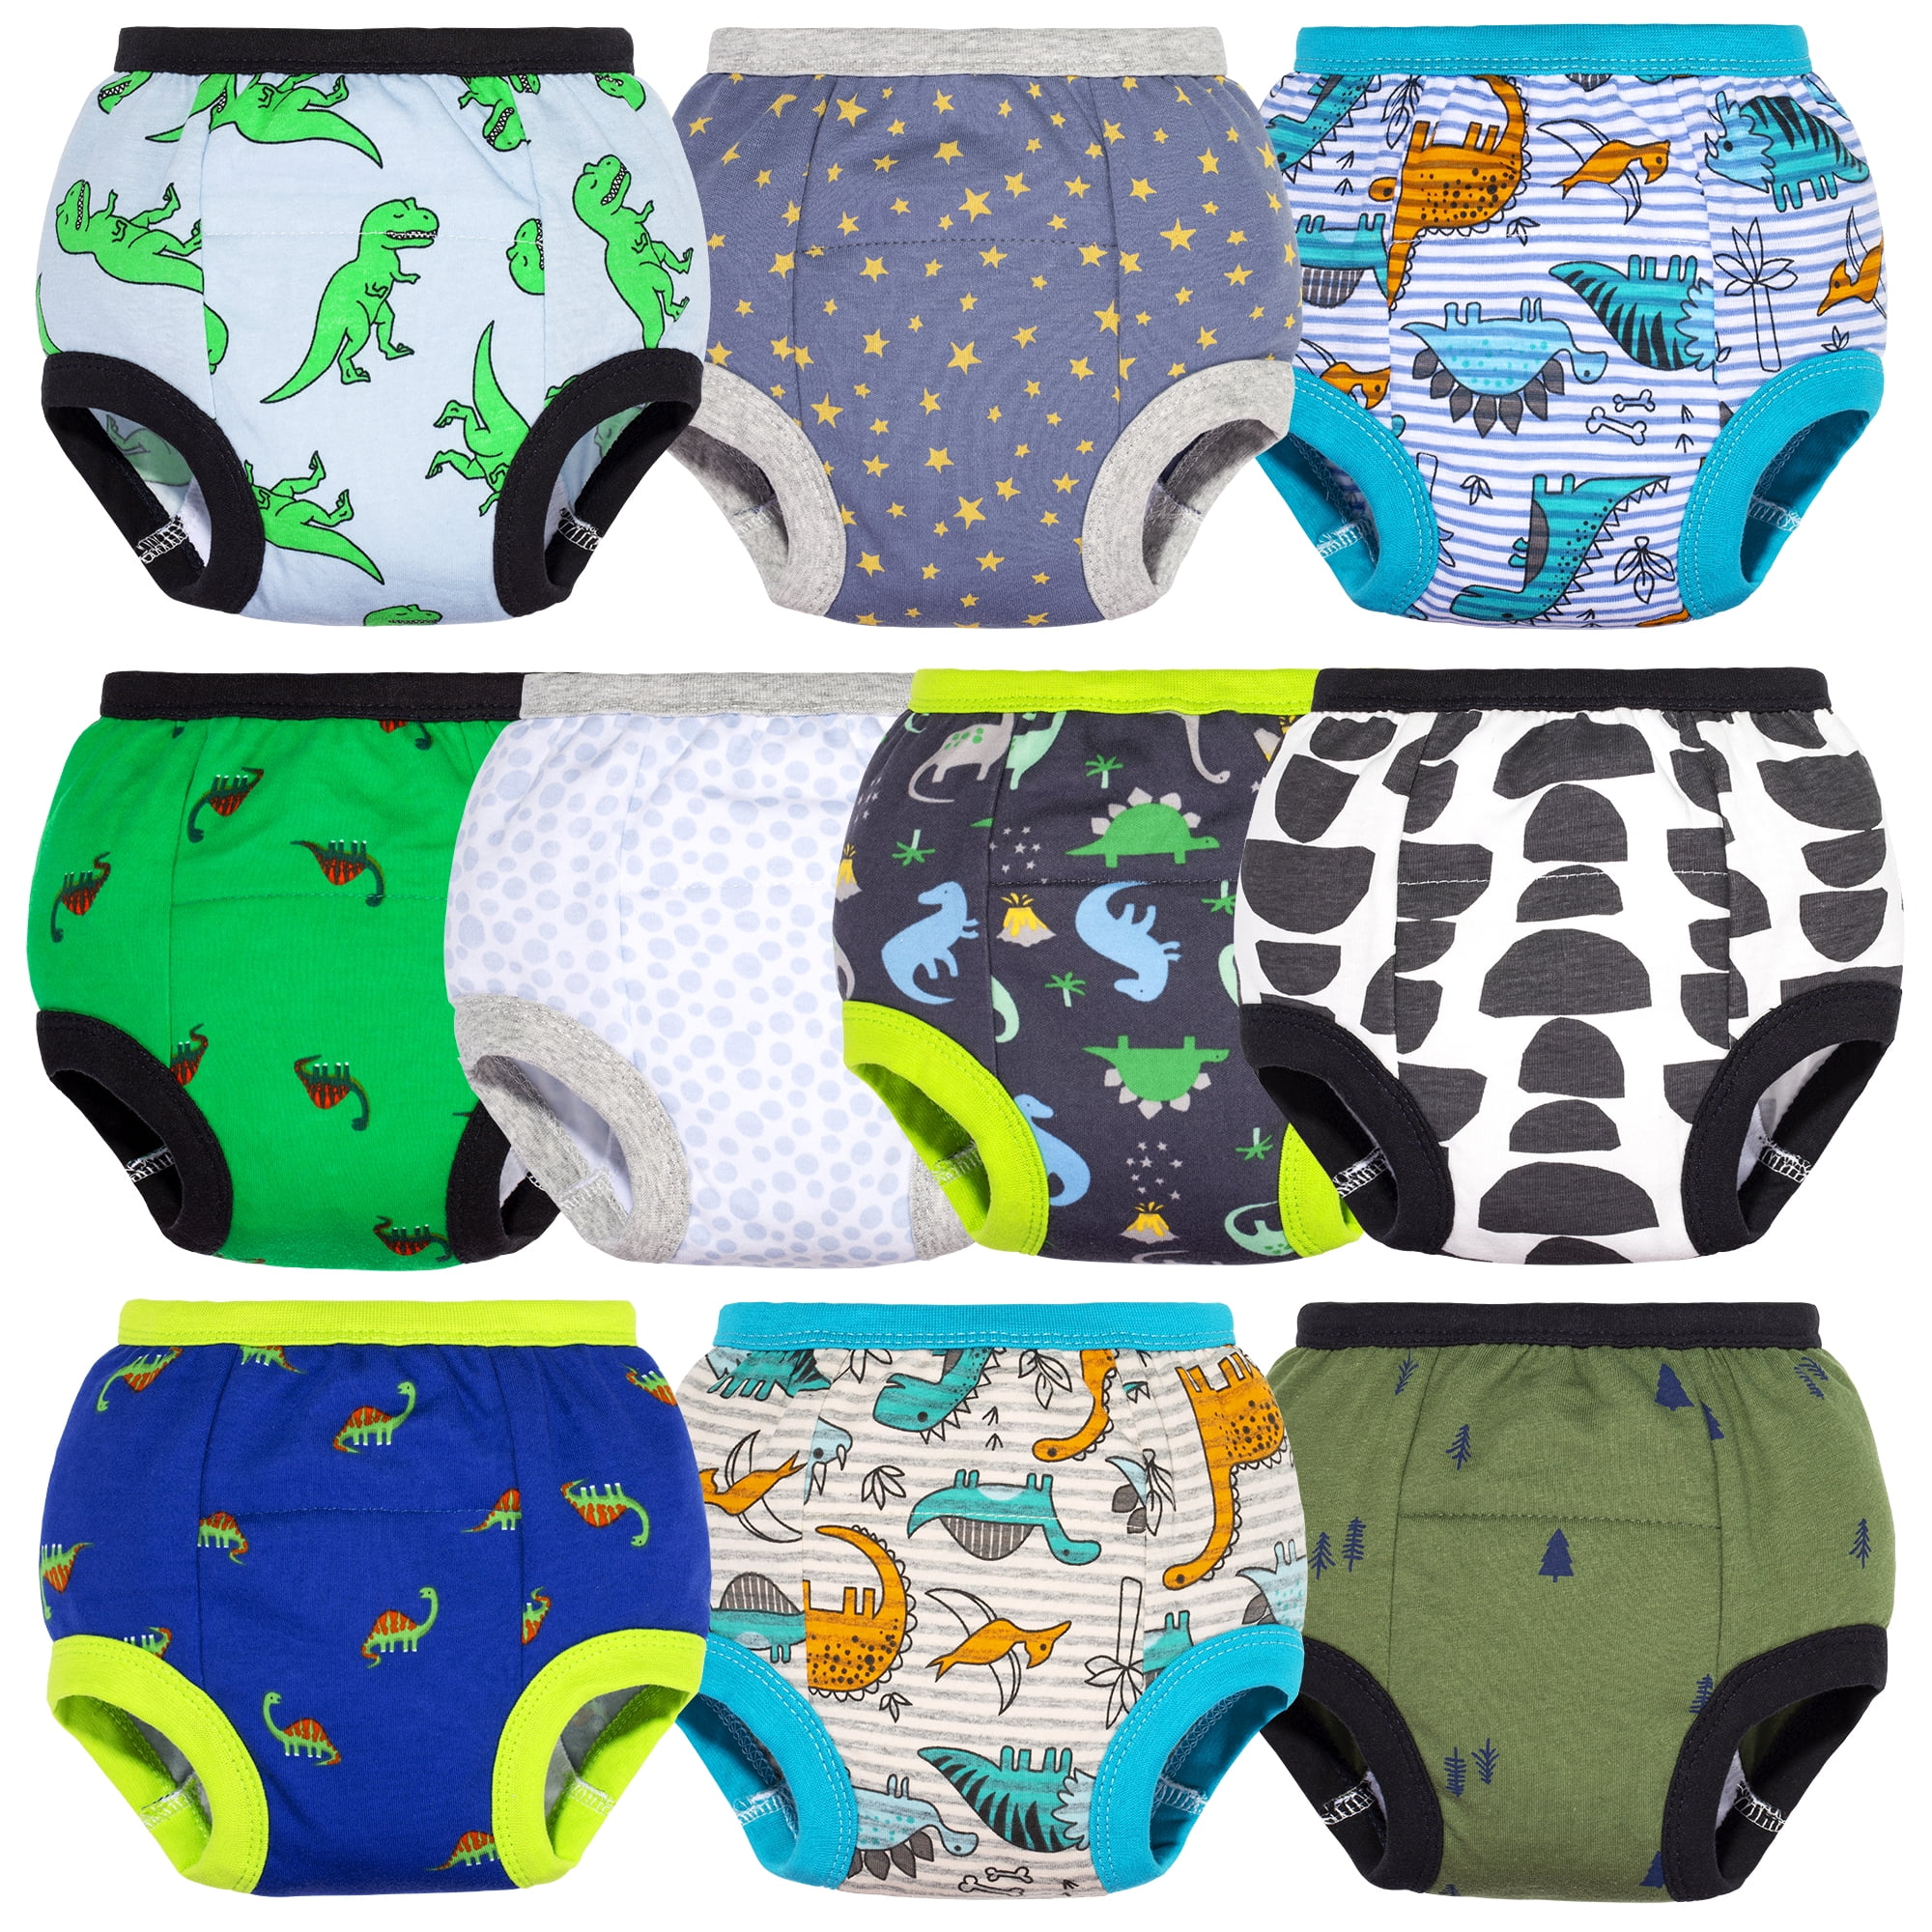 Luvable Friends Baby And Toddler Boy Cotton Training Pants, Whale : Target